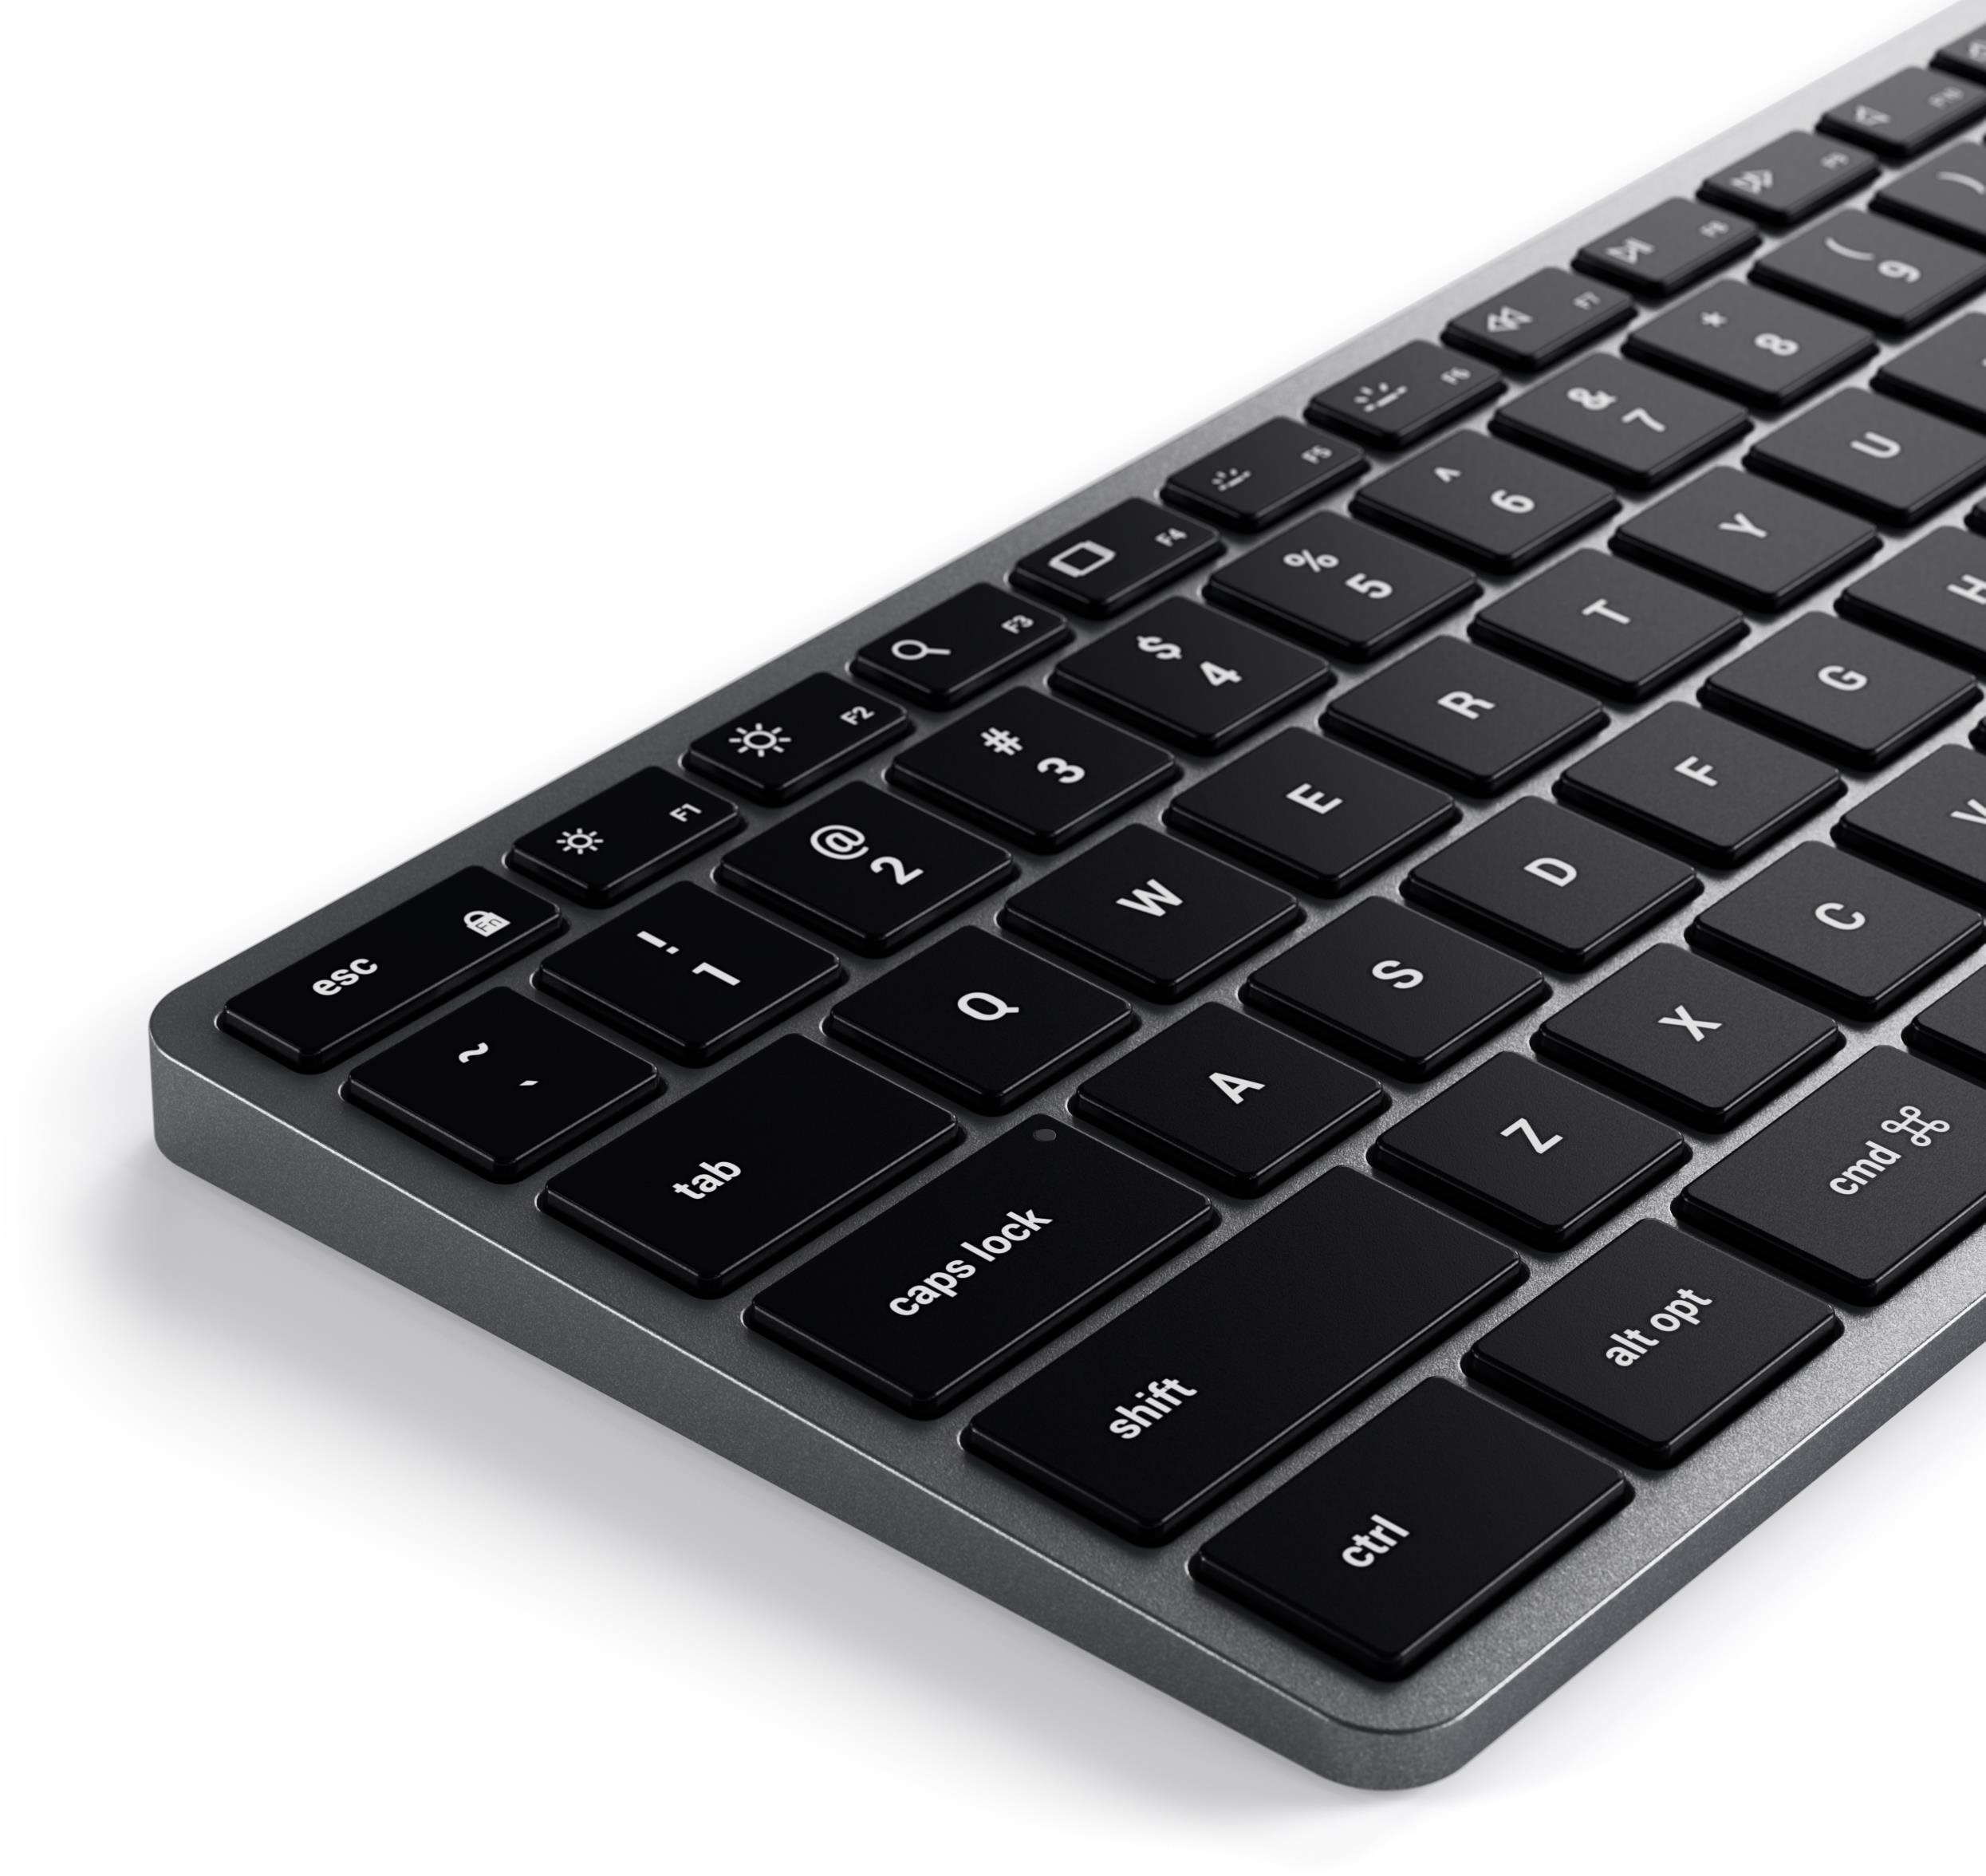 Keyboard Satechi Slim W3 USB-C BACKLIT Wired Keyboard - Space Grey - US Features/technology